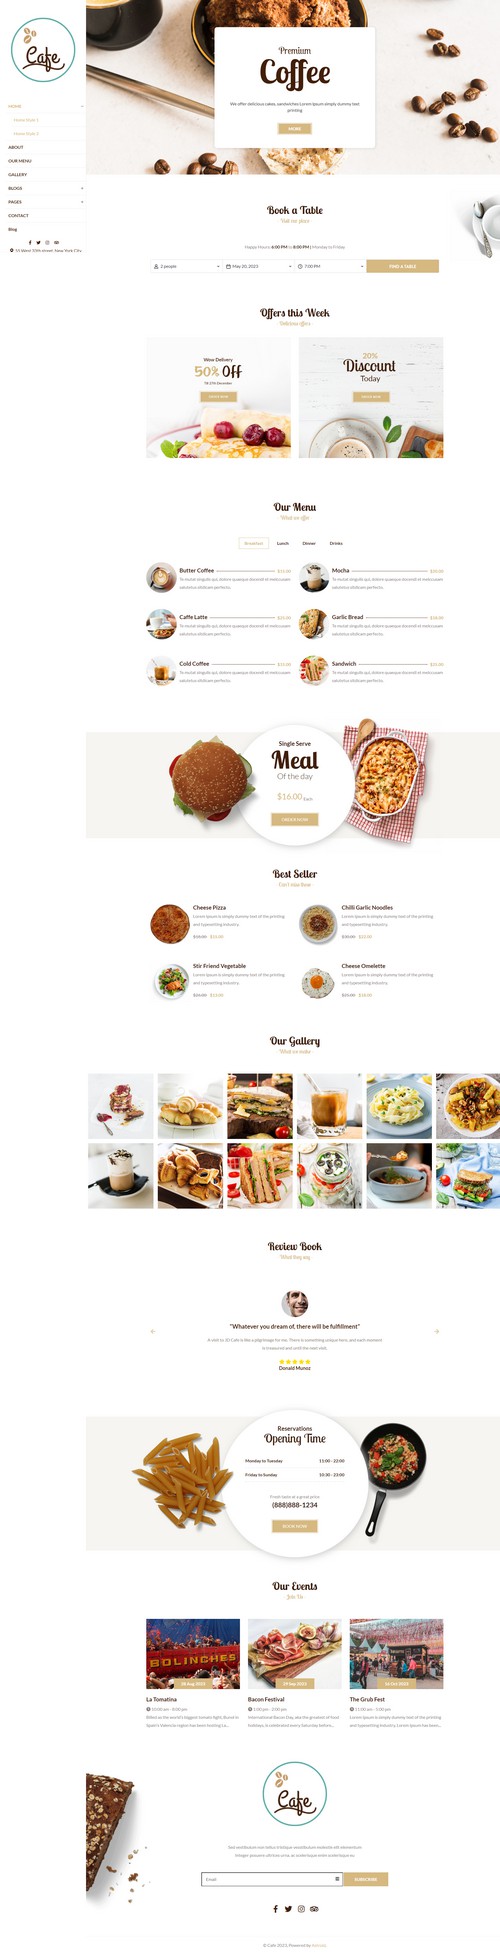 Cafe - Joomla 4 Template for Cafes and Restaurants